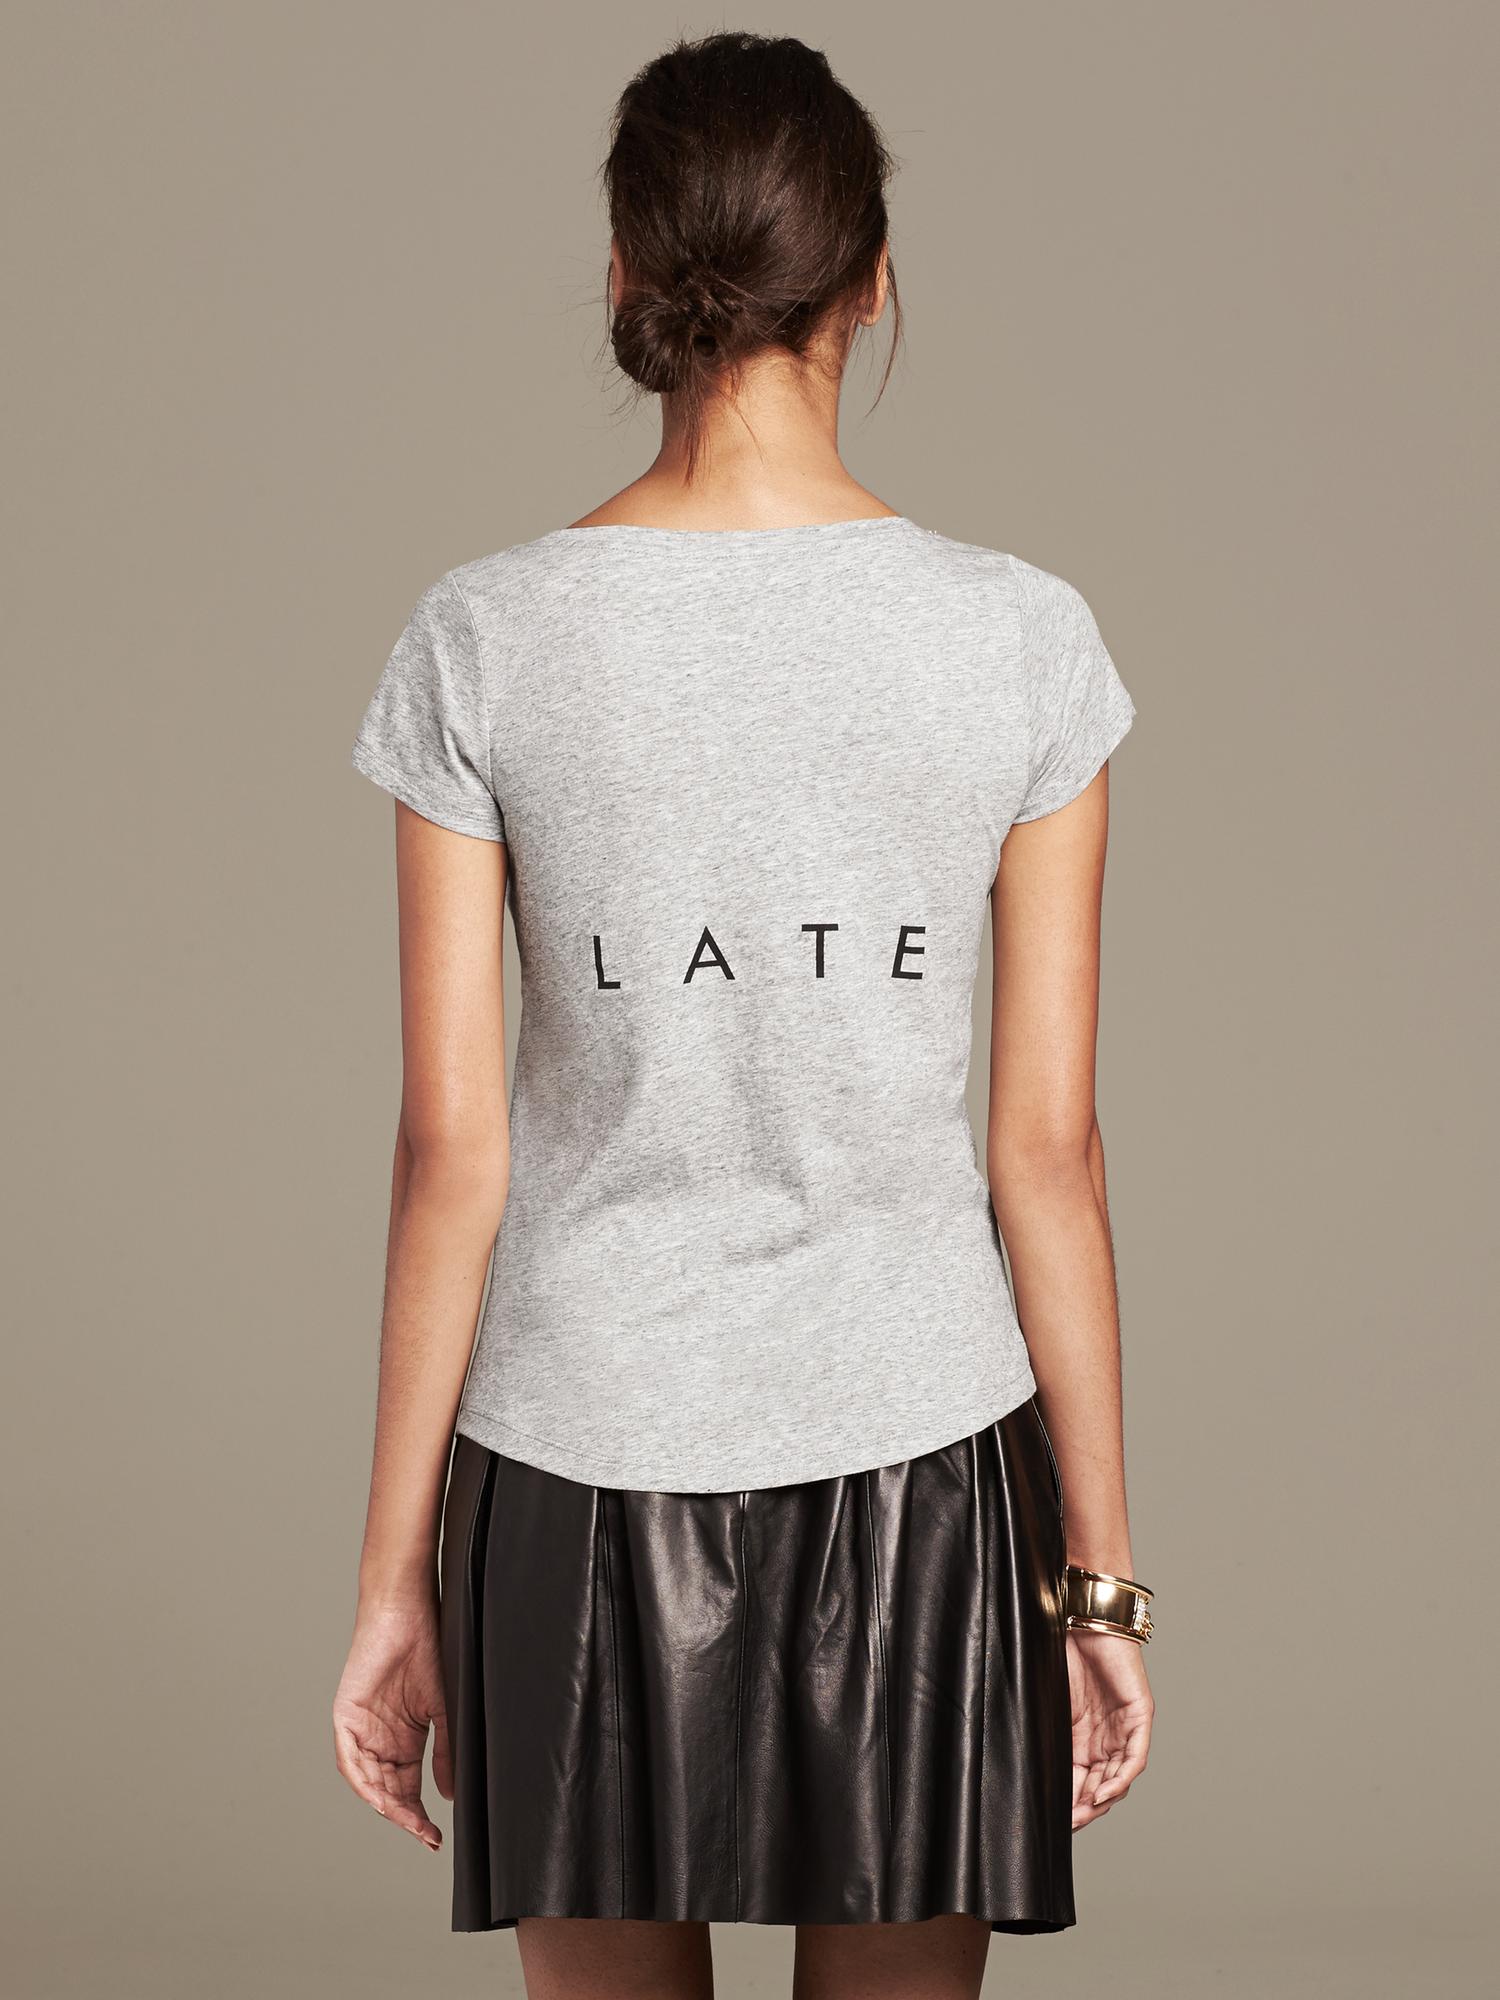 "Just Late" Graphic Tee